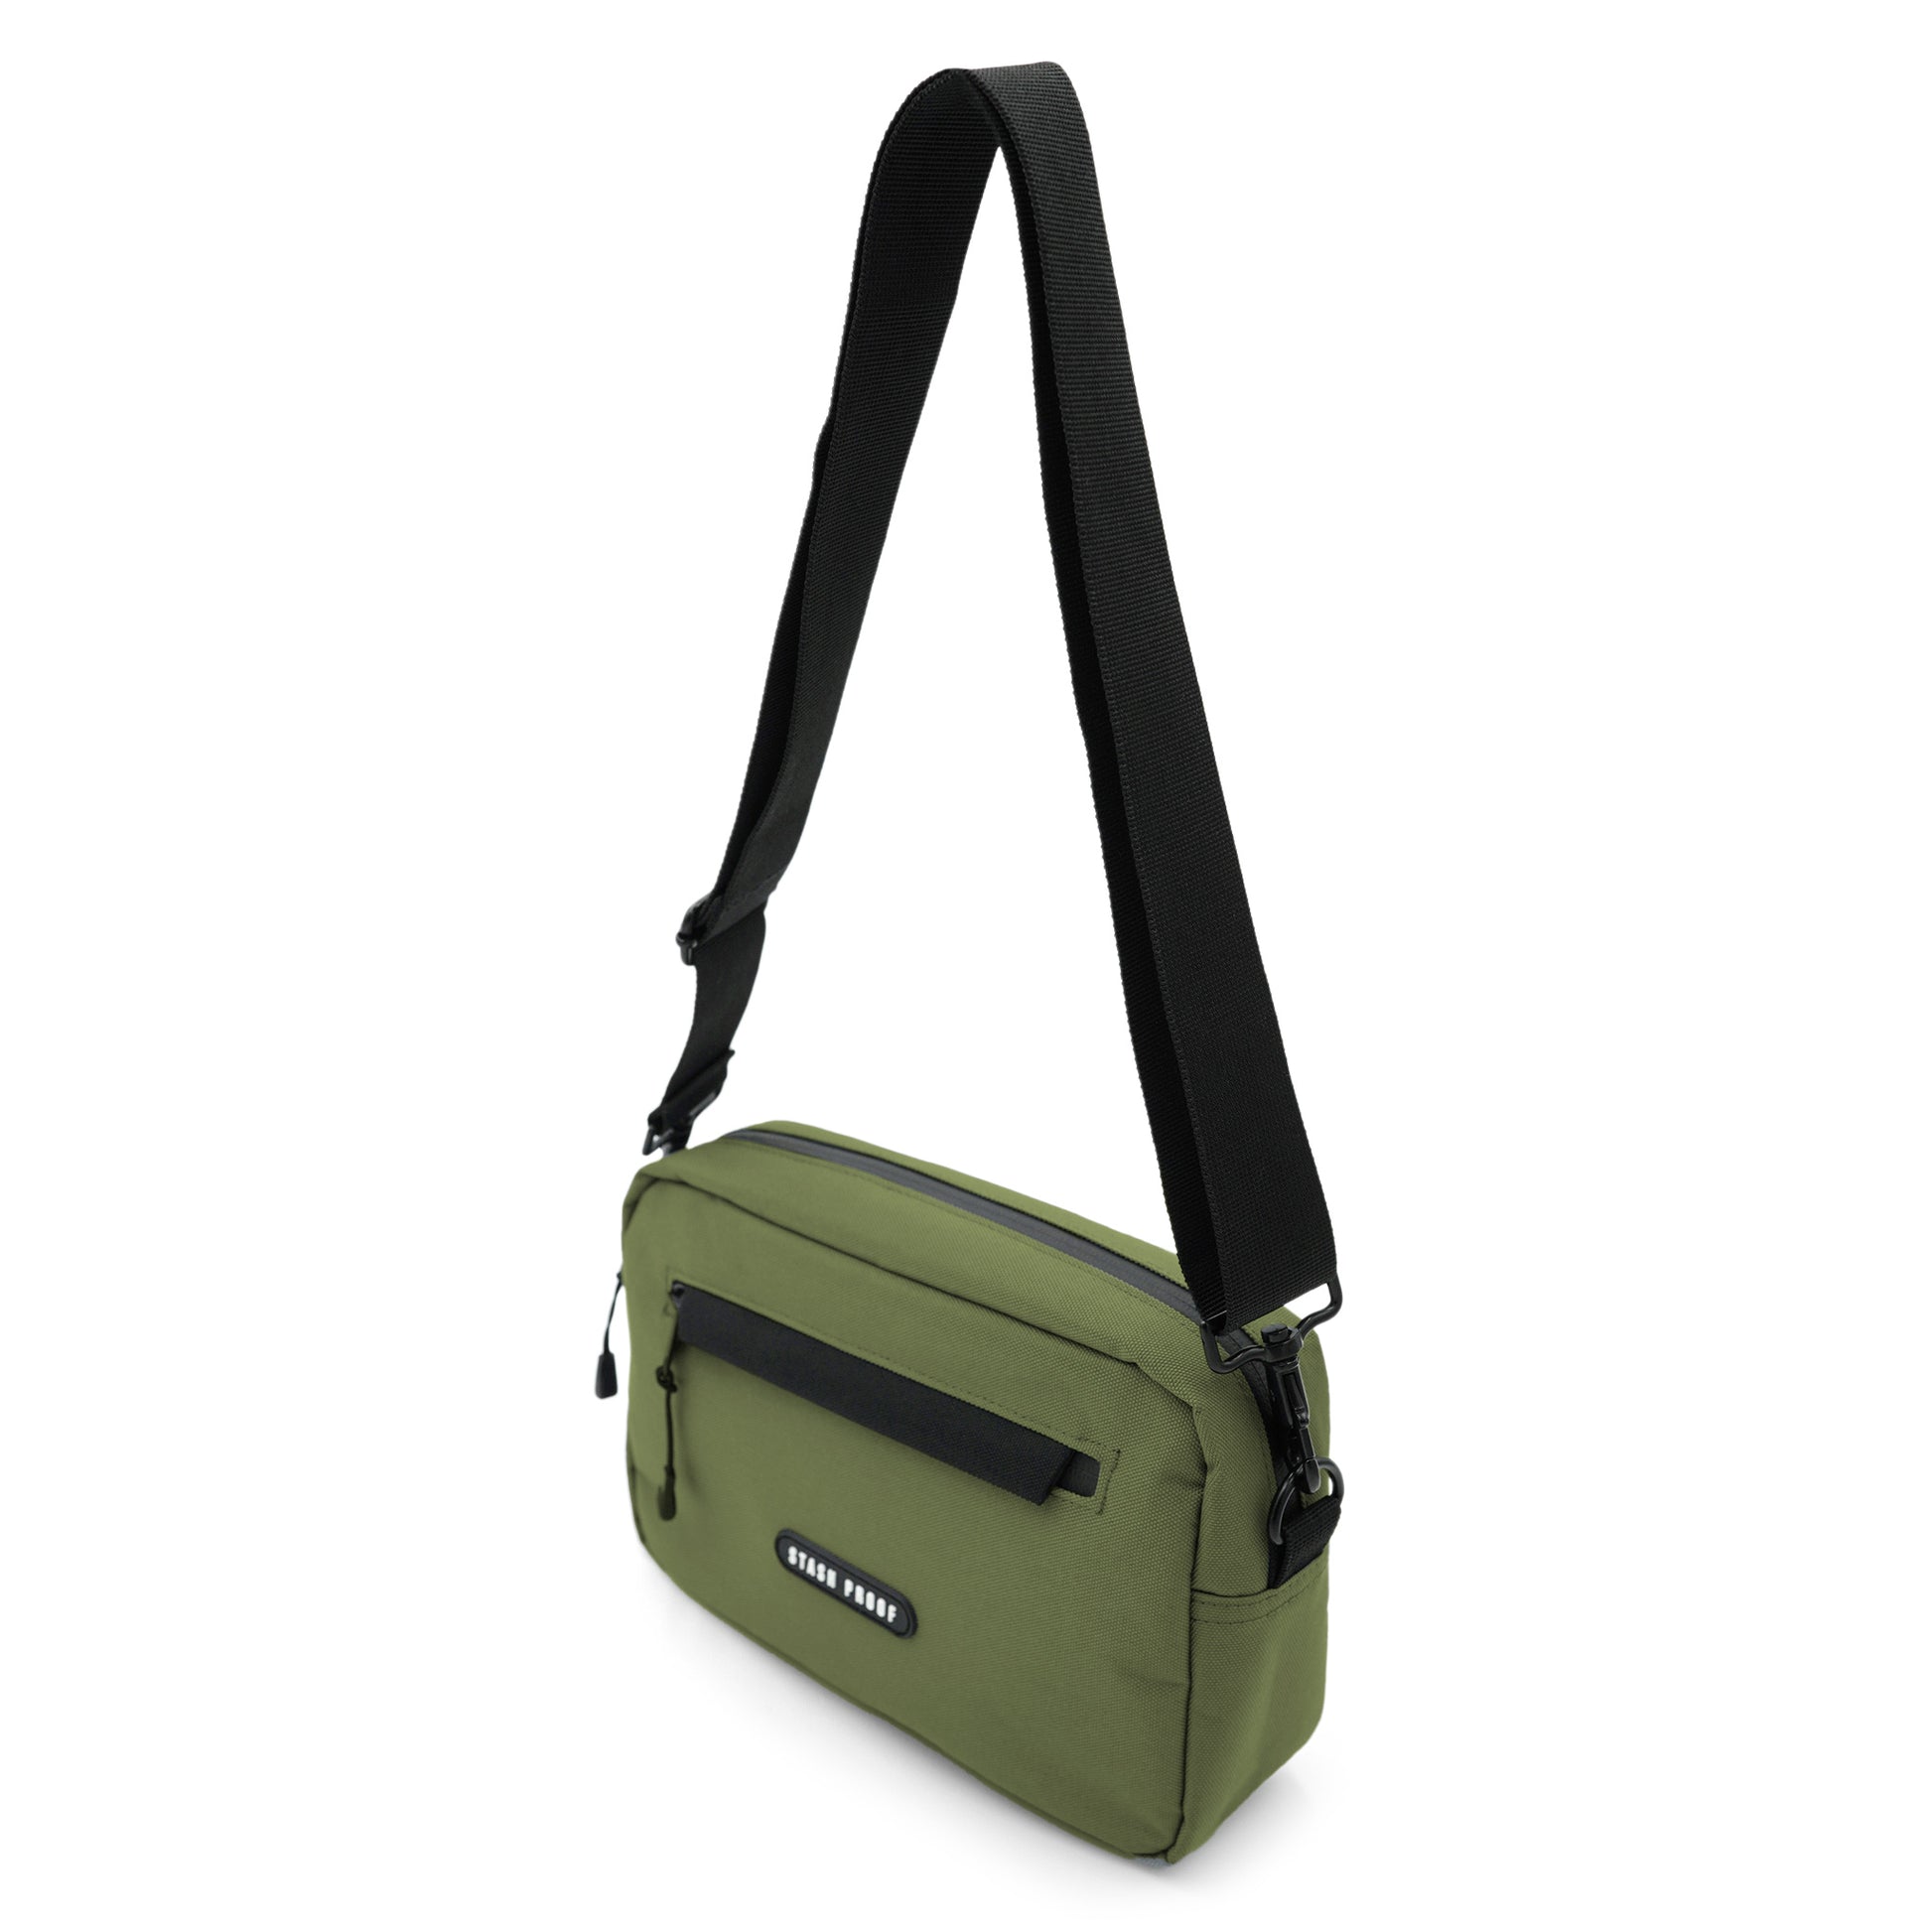 A green Rover bag made from polyester material with a black strap strap hanging in the air